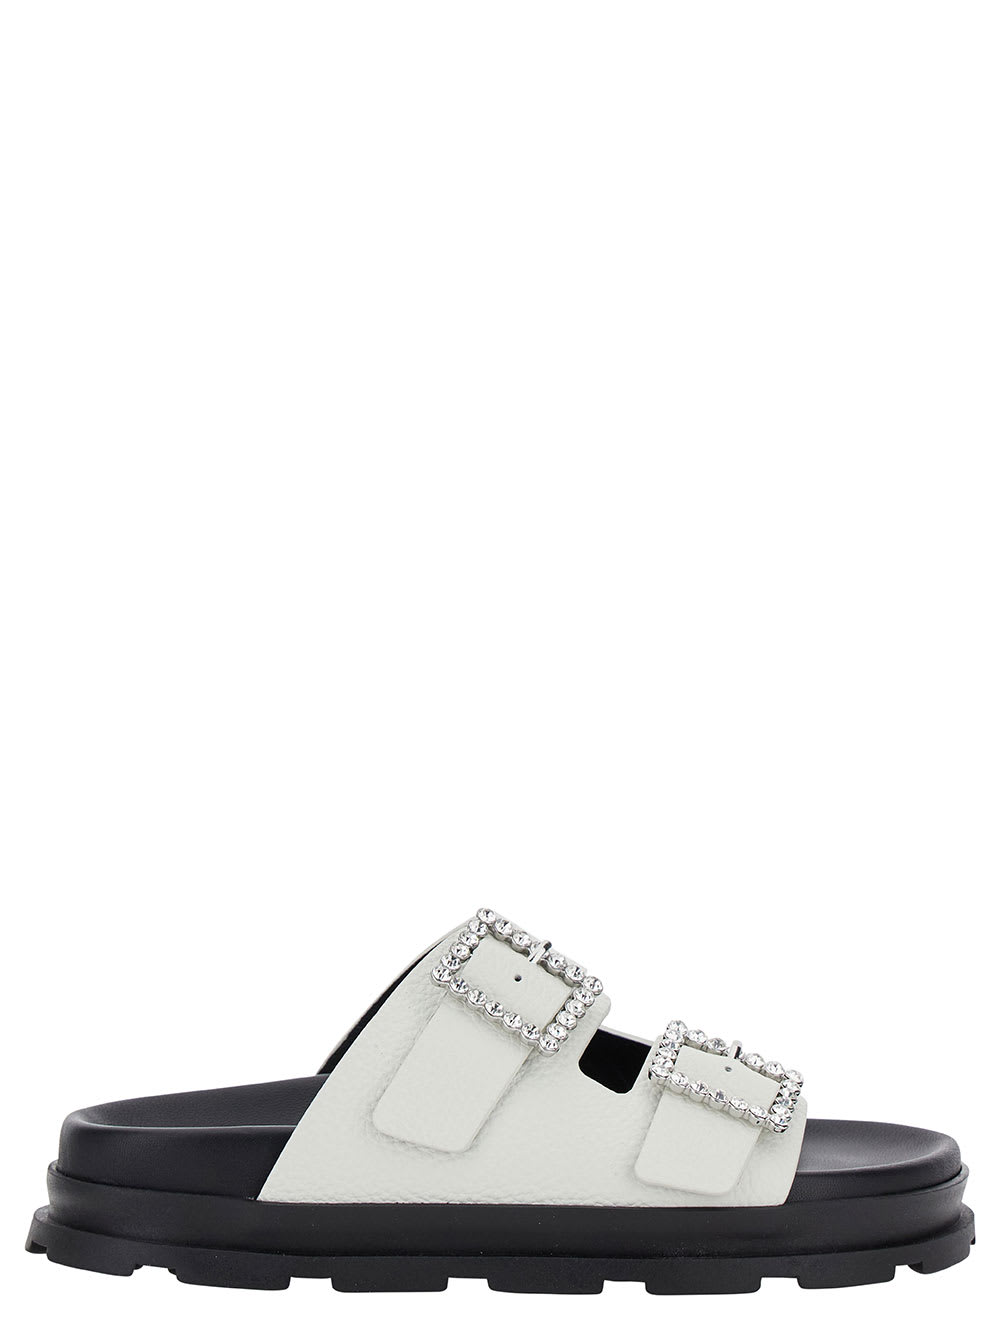 POLLINI WHITE SANDALS WITH RHINESTONE BUCKLE IN HAMMERED LEATHER WOMAN